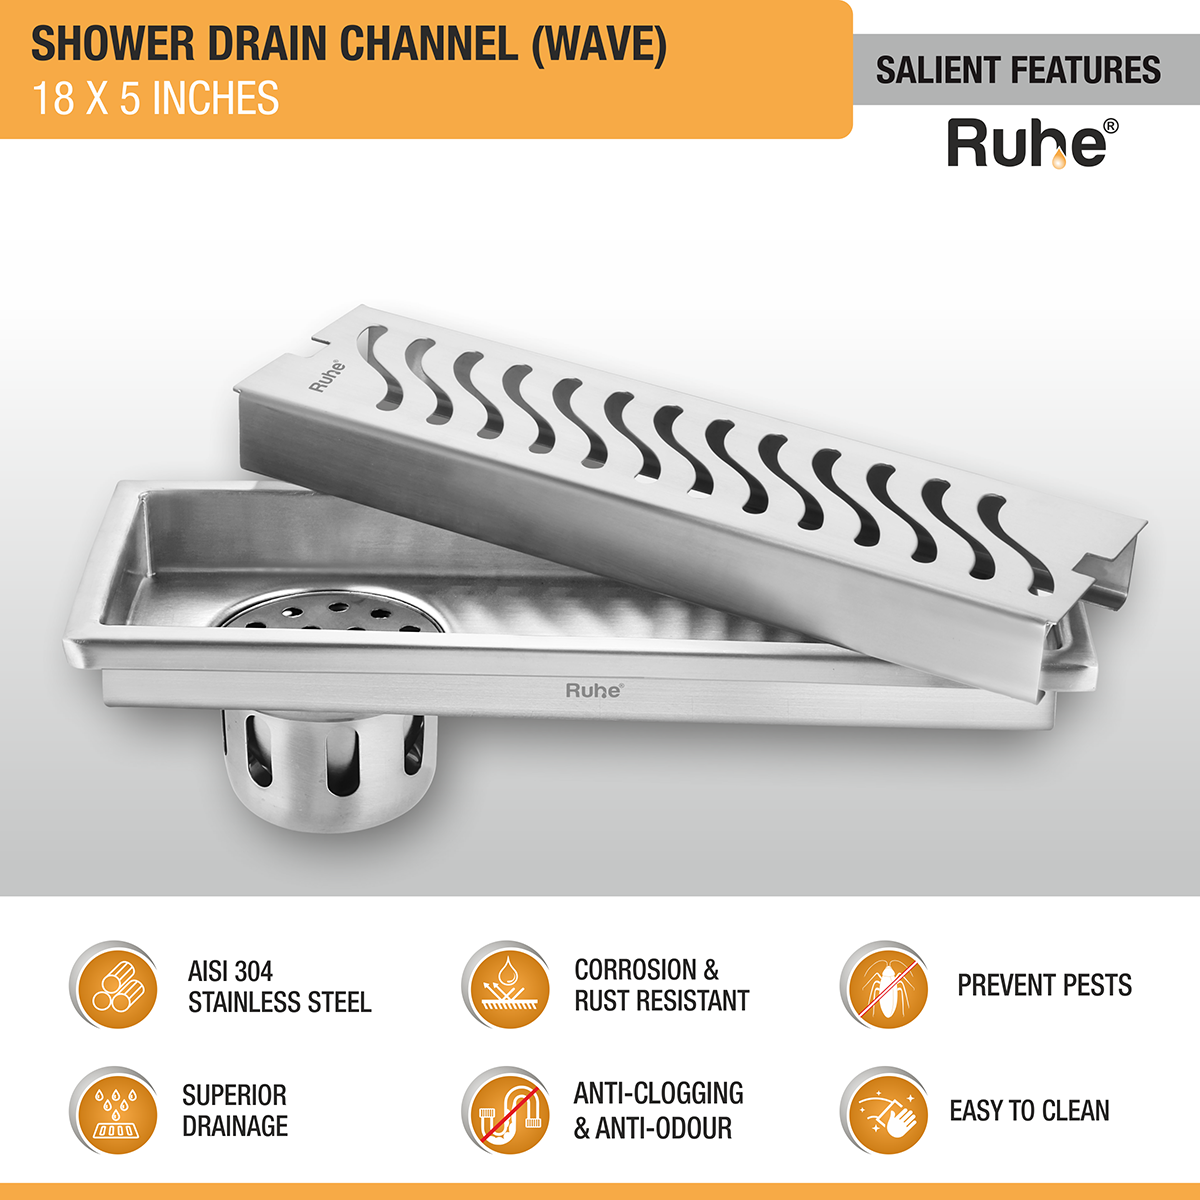 Wave Shower Drain Channel (18 X 5 Inches) with Cockroach Trap (304 Grade) features